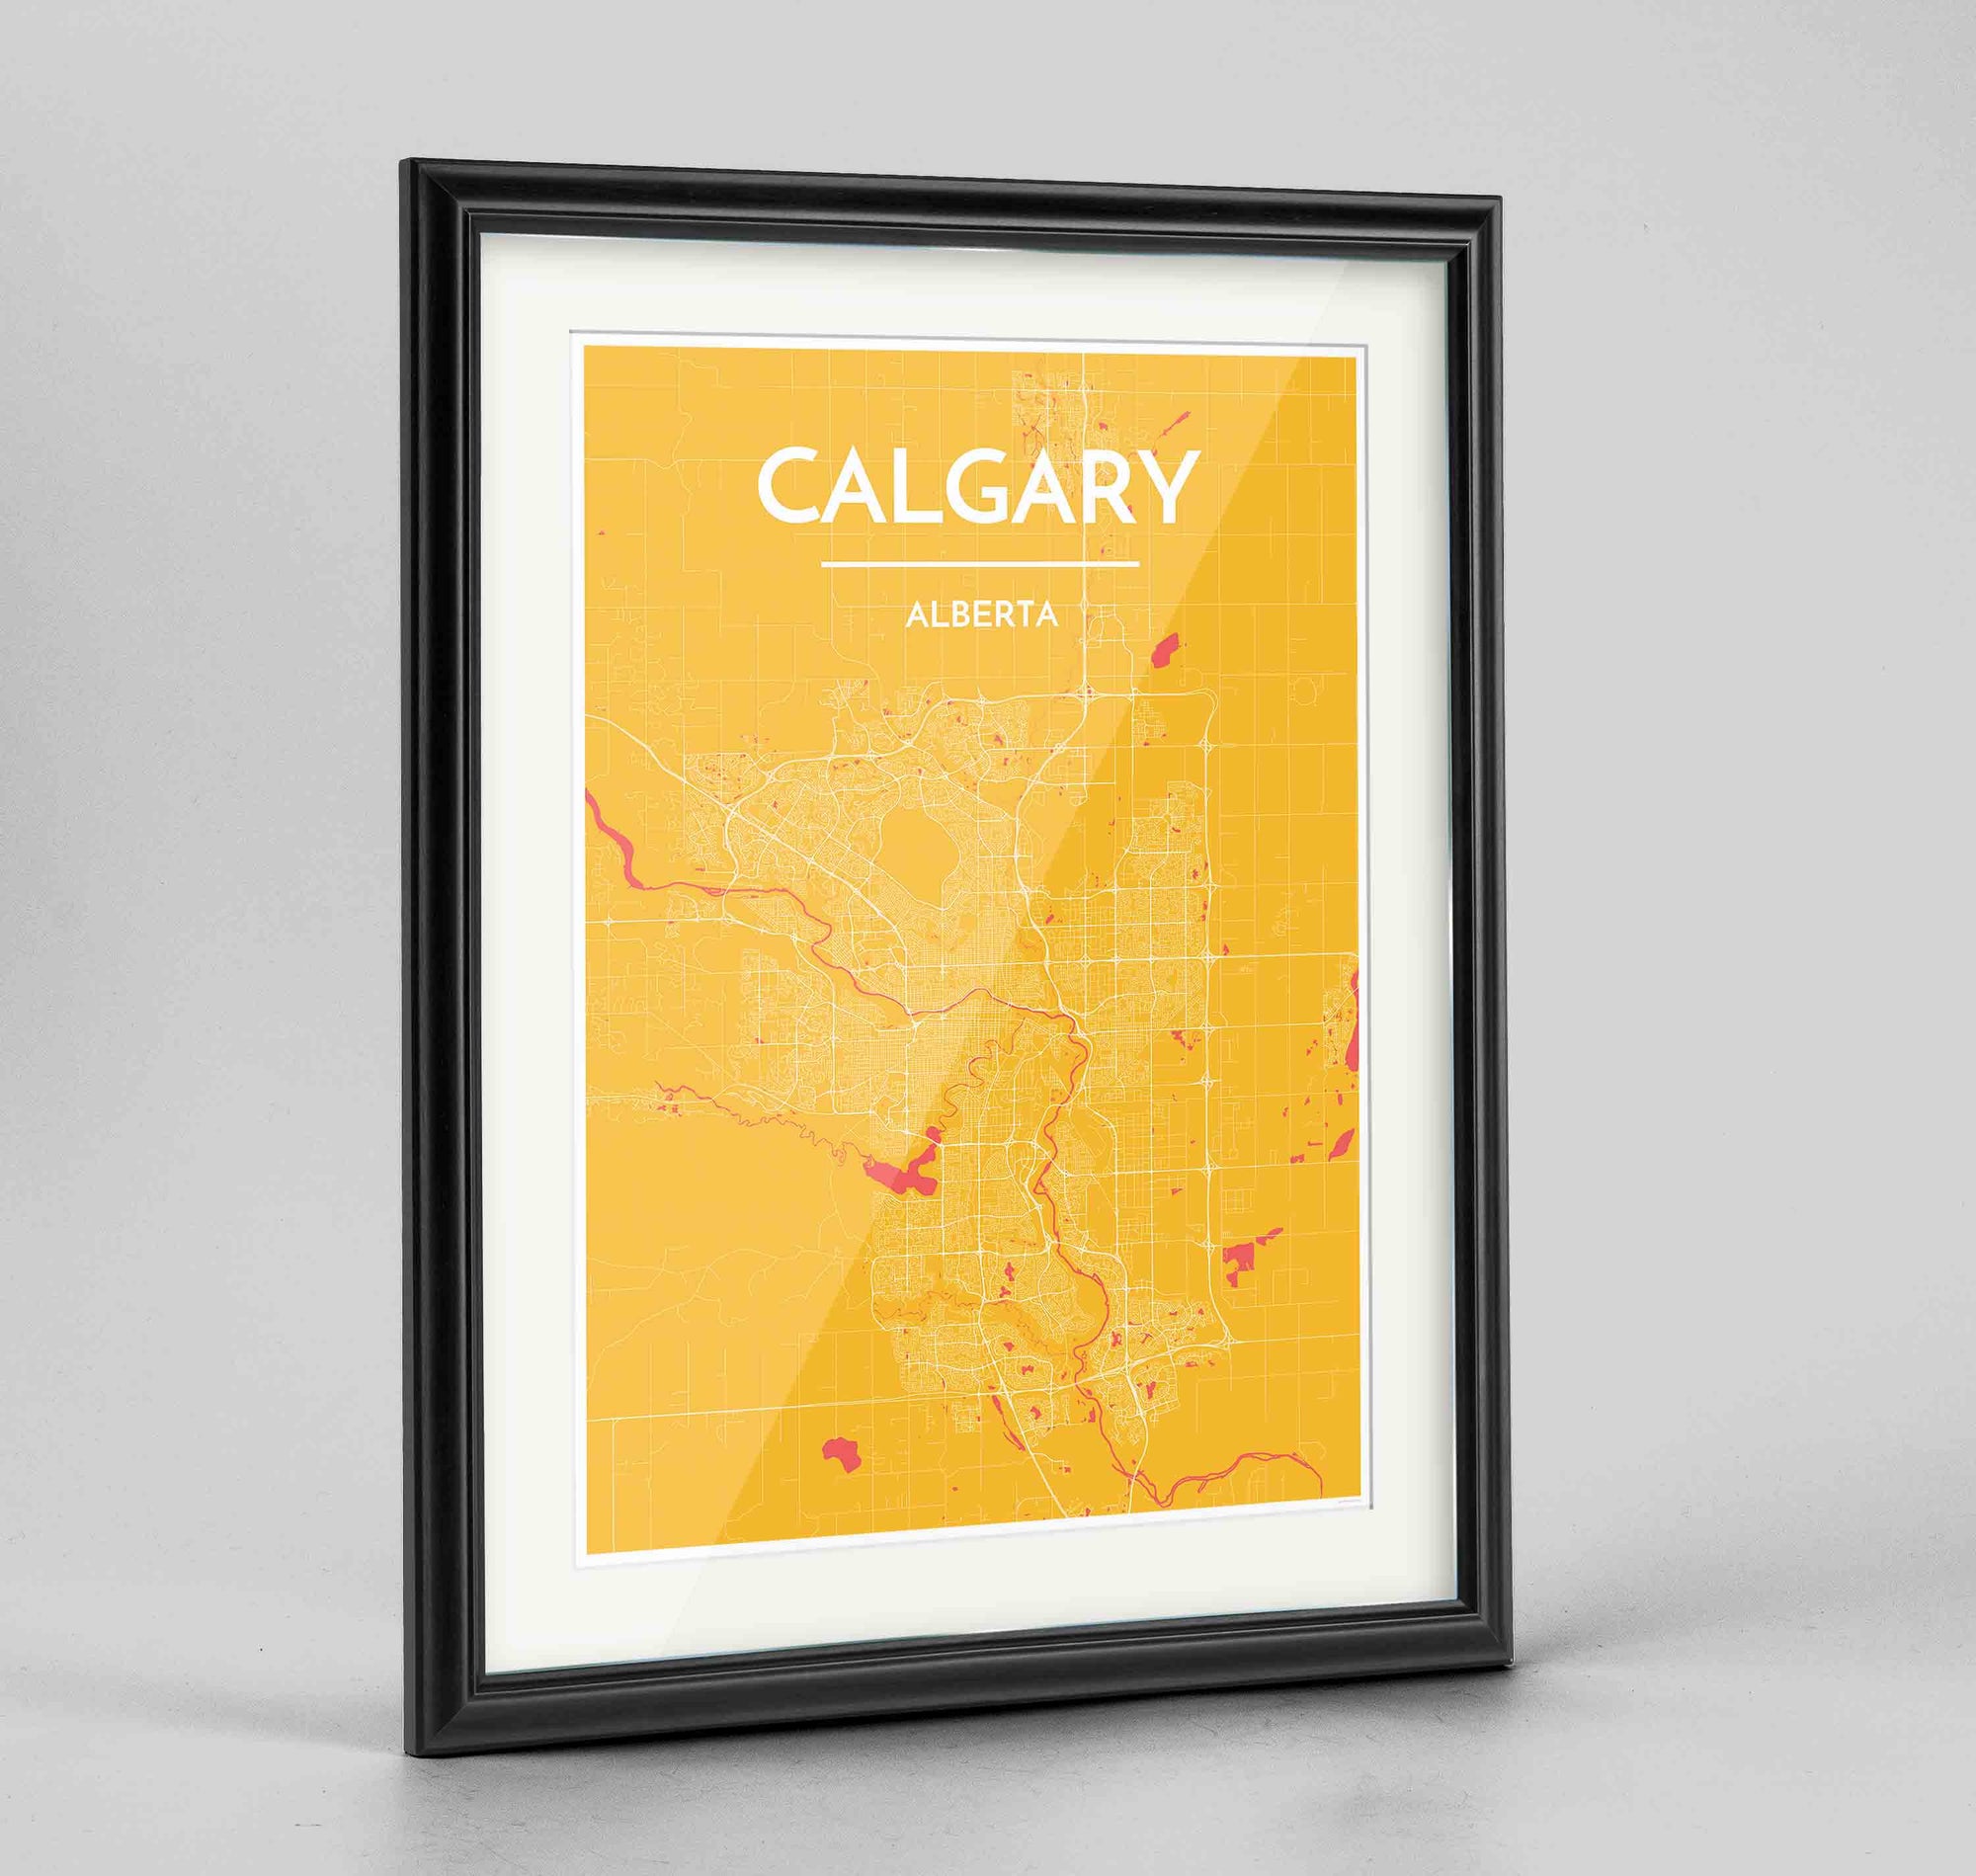 Framed Calgary City Map 24x36" Traditional Black frame Point Two Design Group